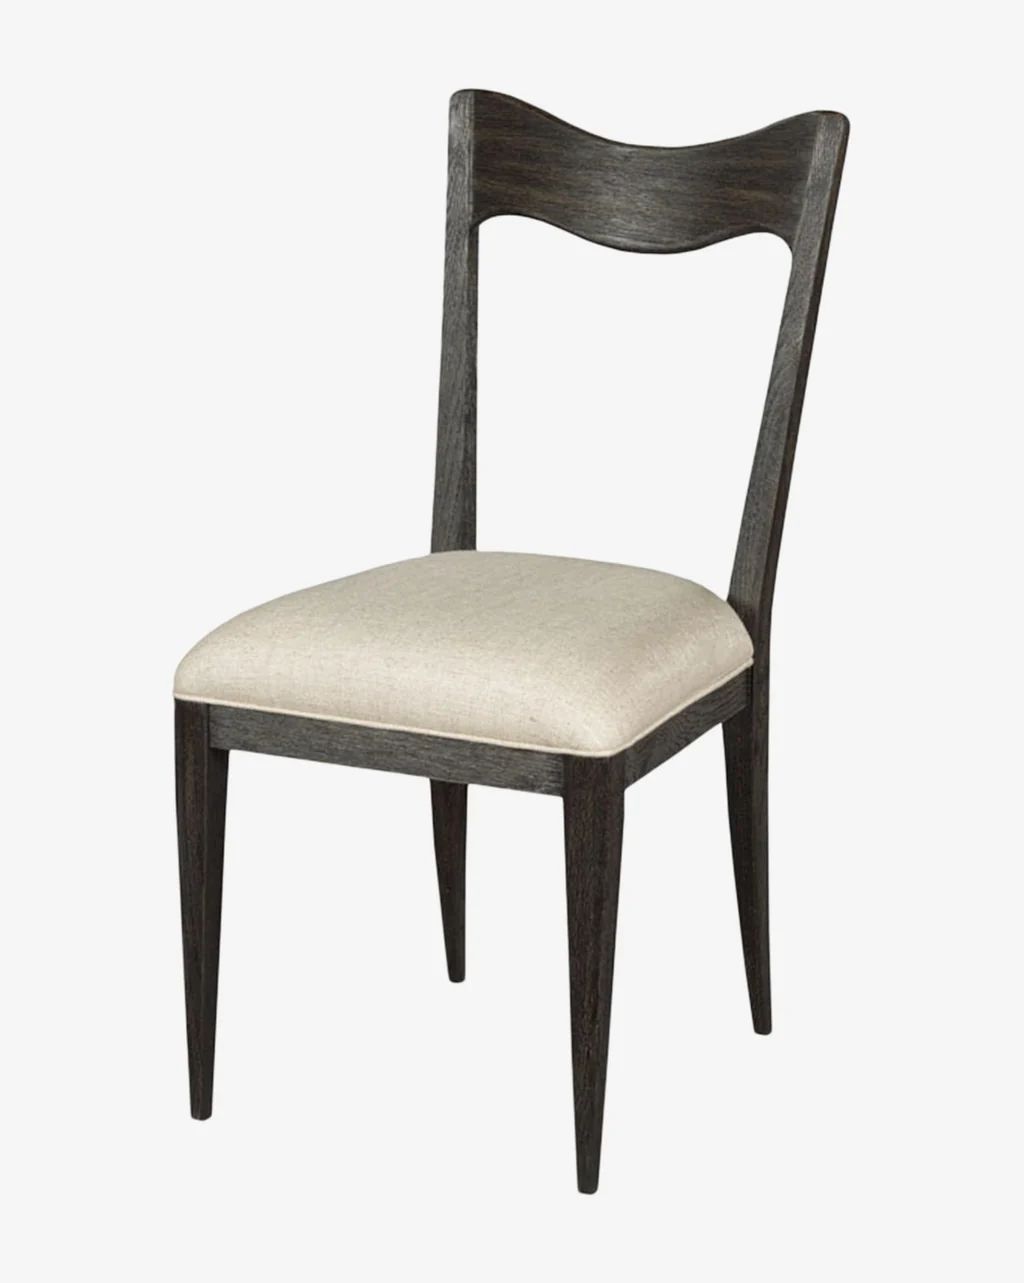 Melody Chair | McGee & Co.